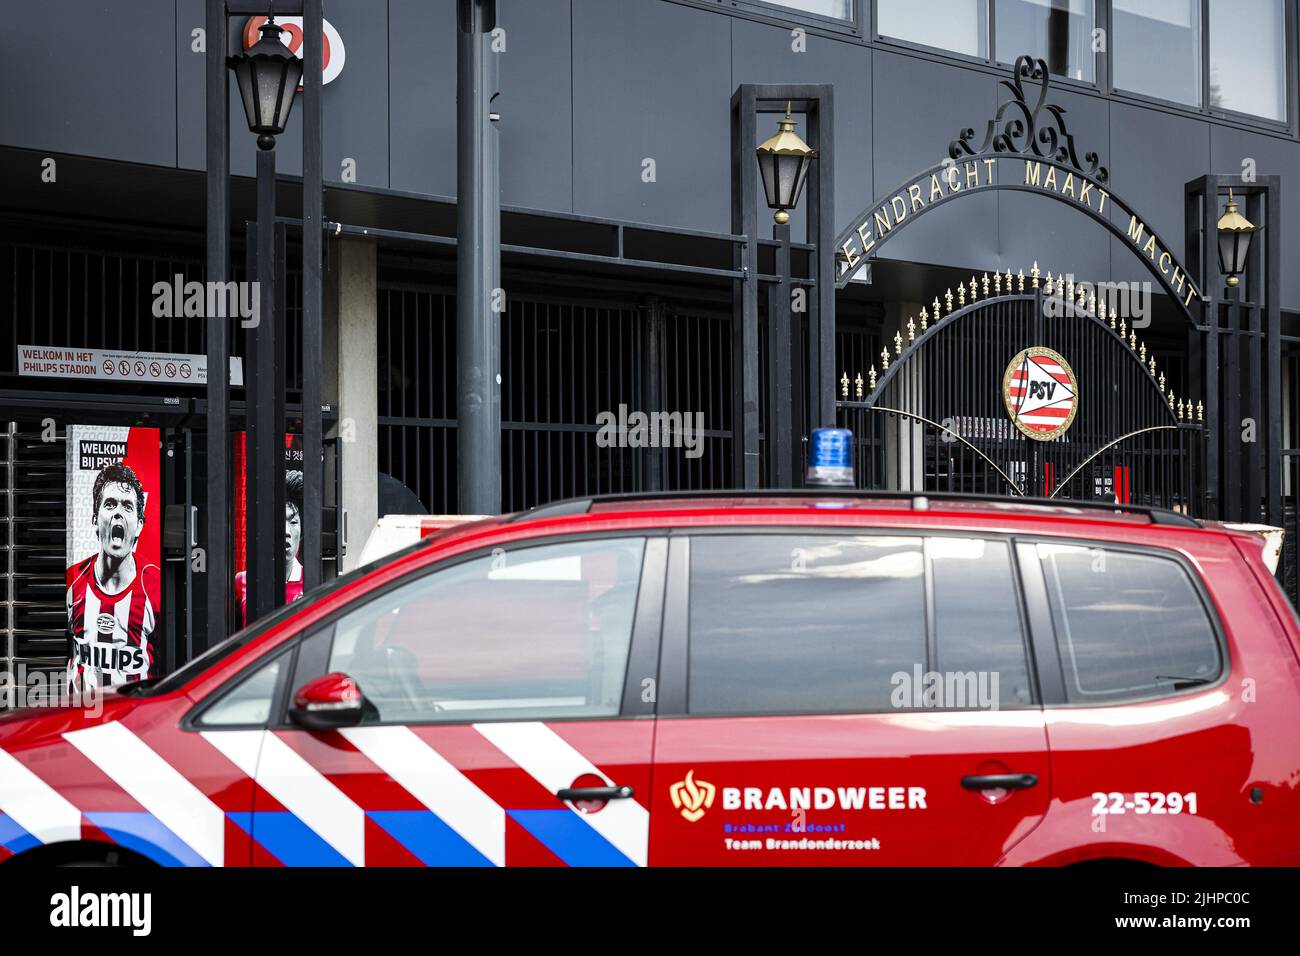 EINDHOVEN, Netherlands, 2022-07-20 10:41:00 EINDHOVEN - A fire brigade car in front of the Philips Stadium, the home of the Eindhoven football club PSV. Part of the roof was damaged by a fire. ANP ROB ENGELAAR netherlands out - belgium out Stock Photo